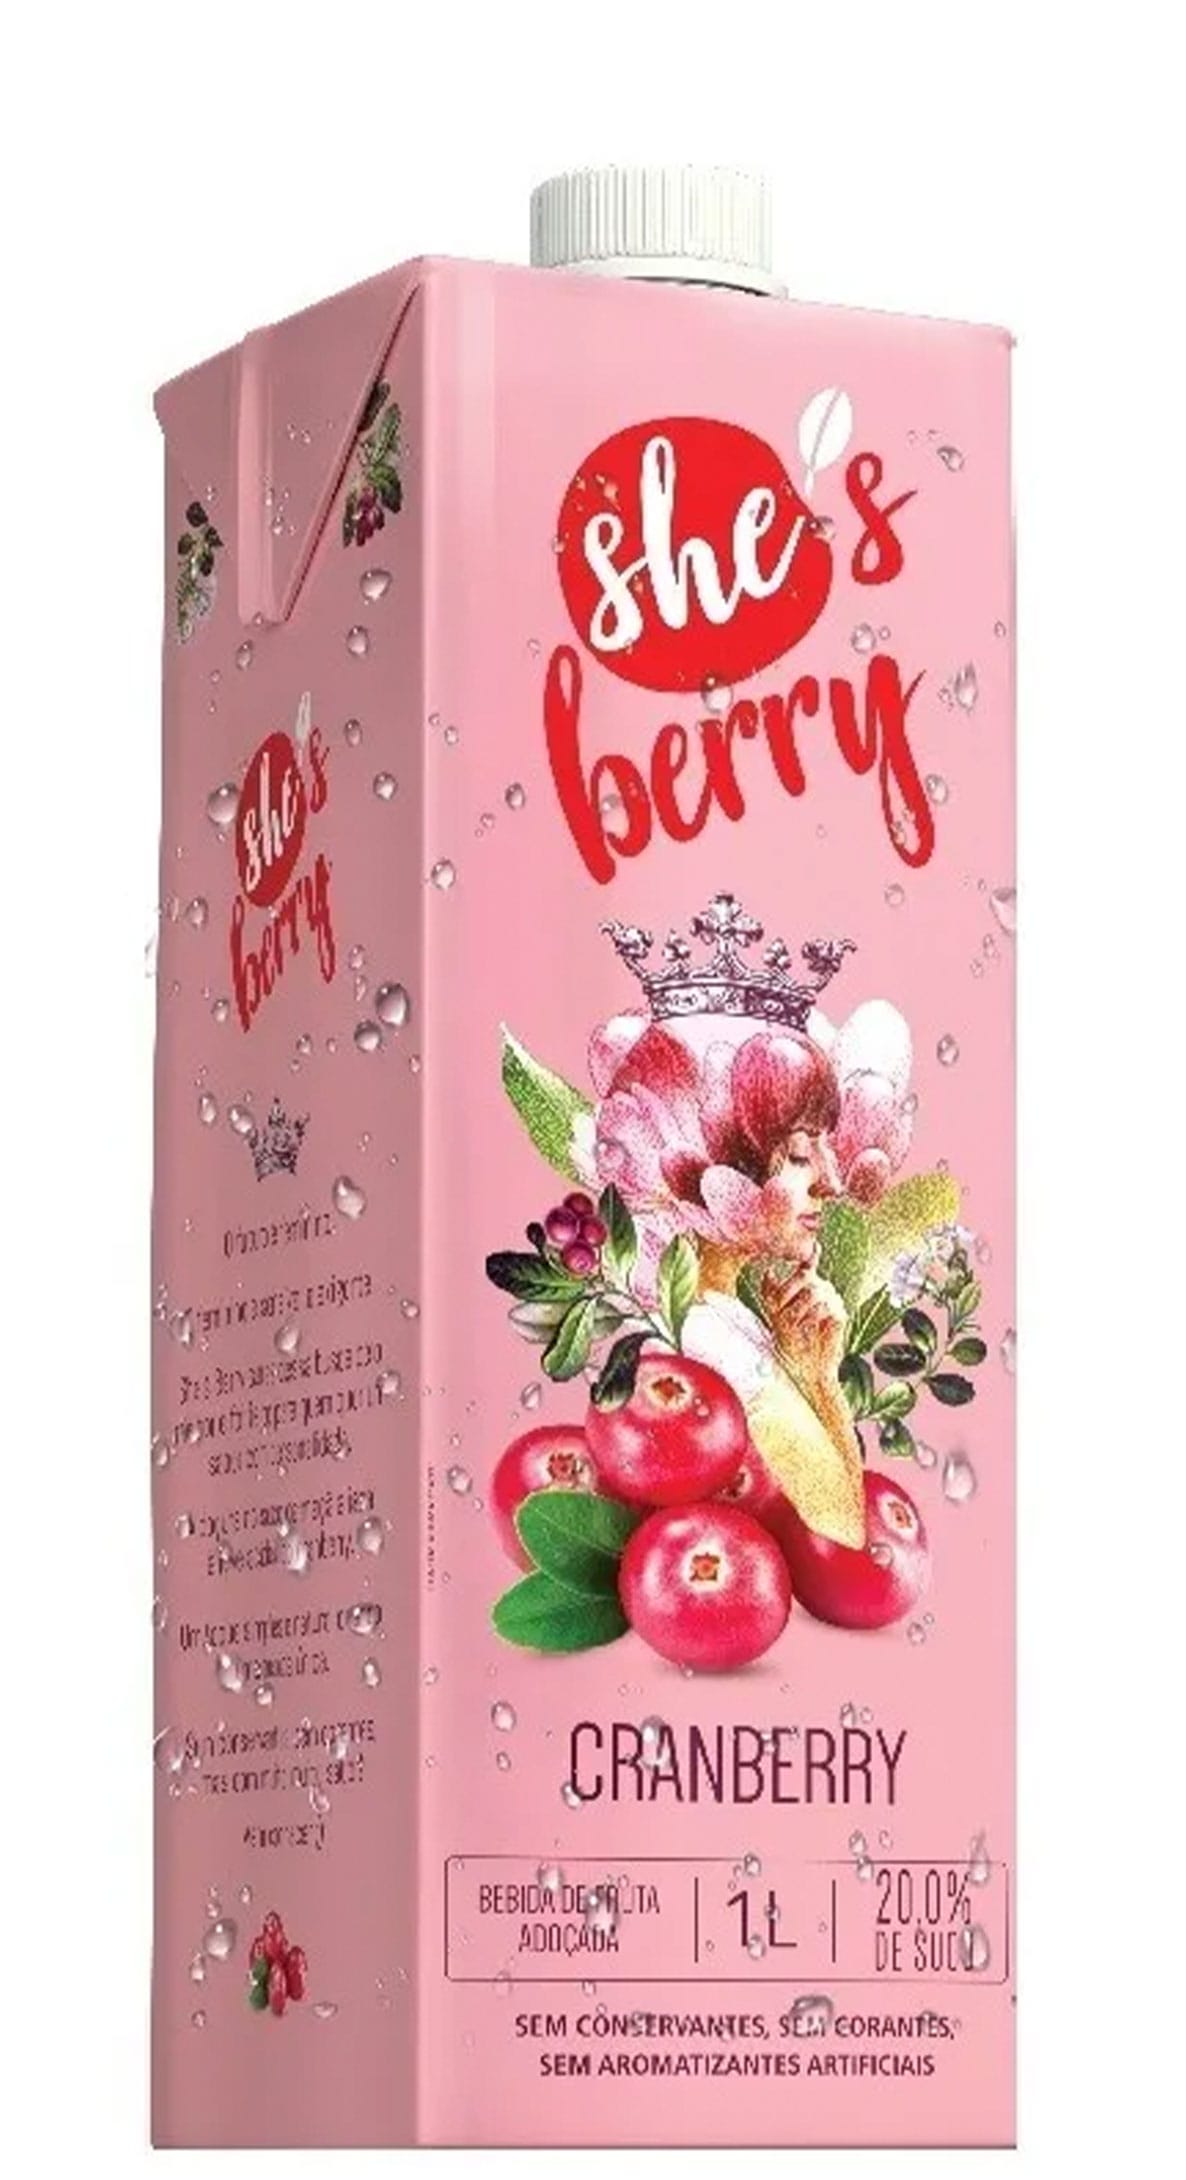 7898954798172 - SHES BERRY CRANBERRY 1L